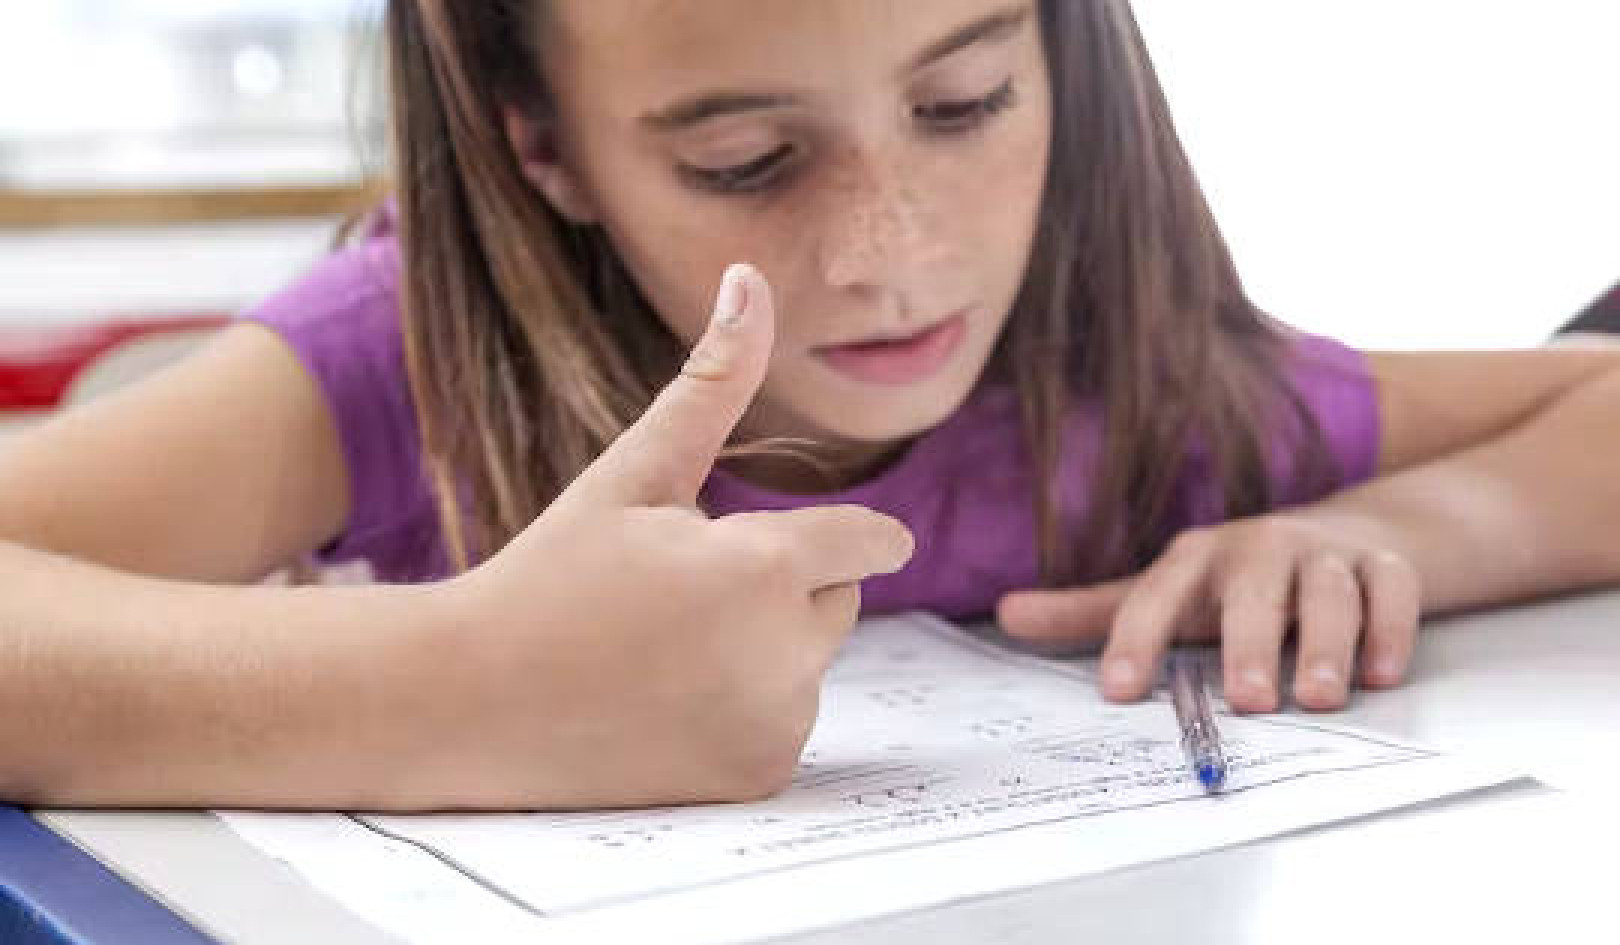 Dyscalculia: How to Support A Child Who Has Math Difficulties